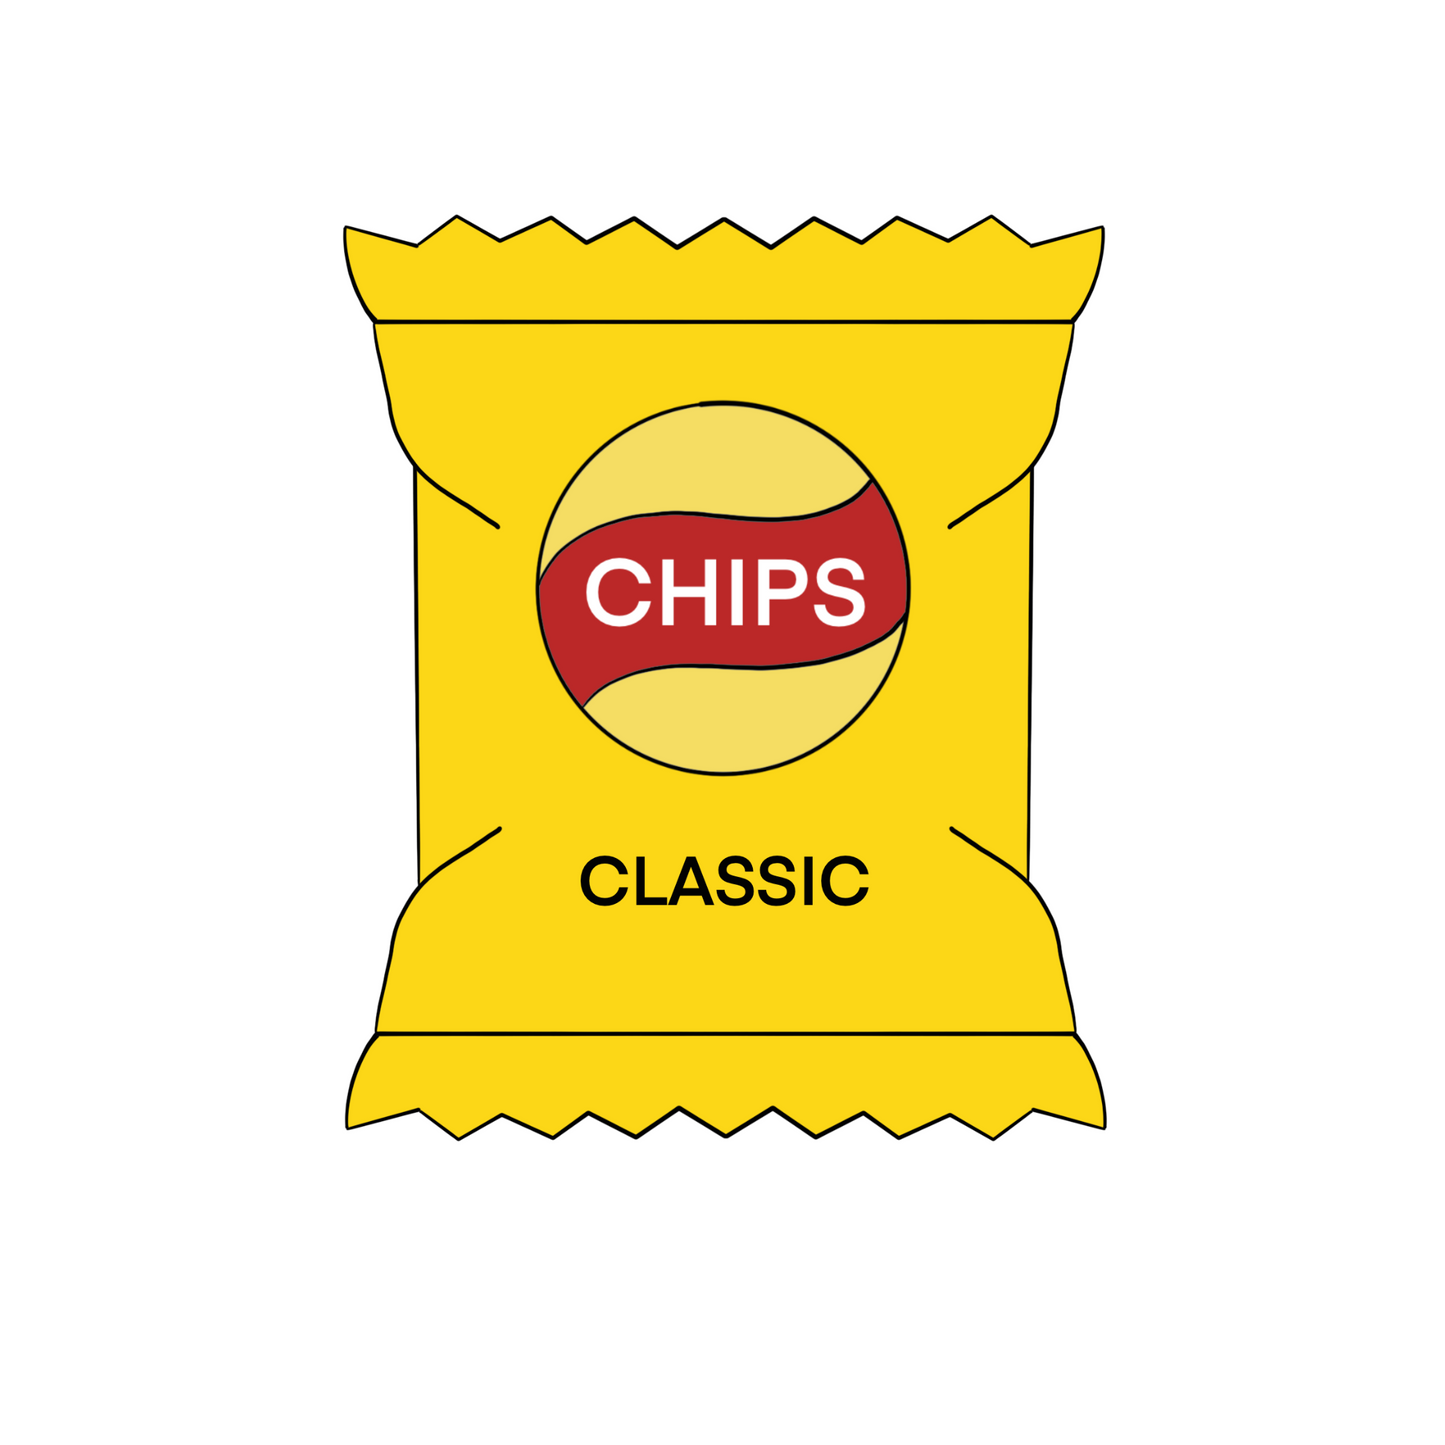 Potato Chip and Bag Set Cookie Cutter & STLs